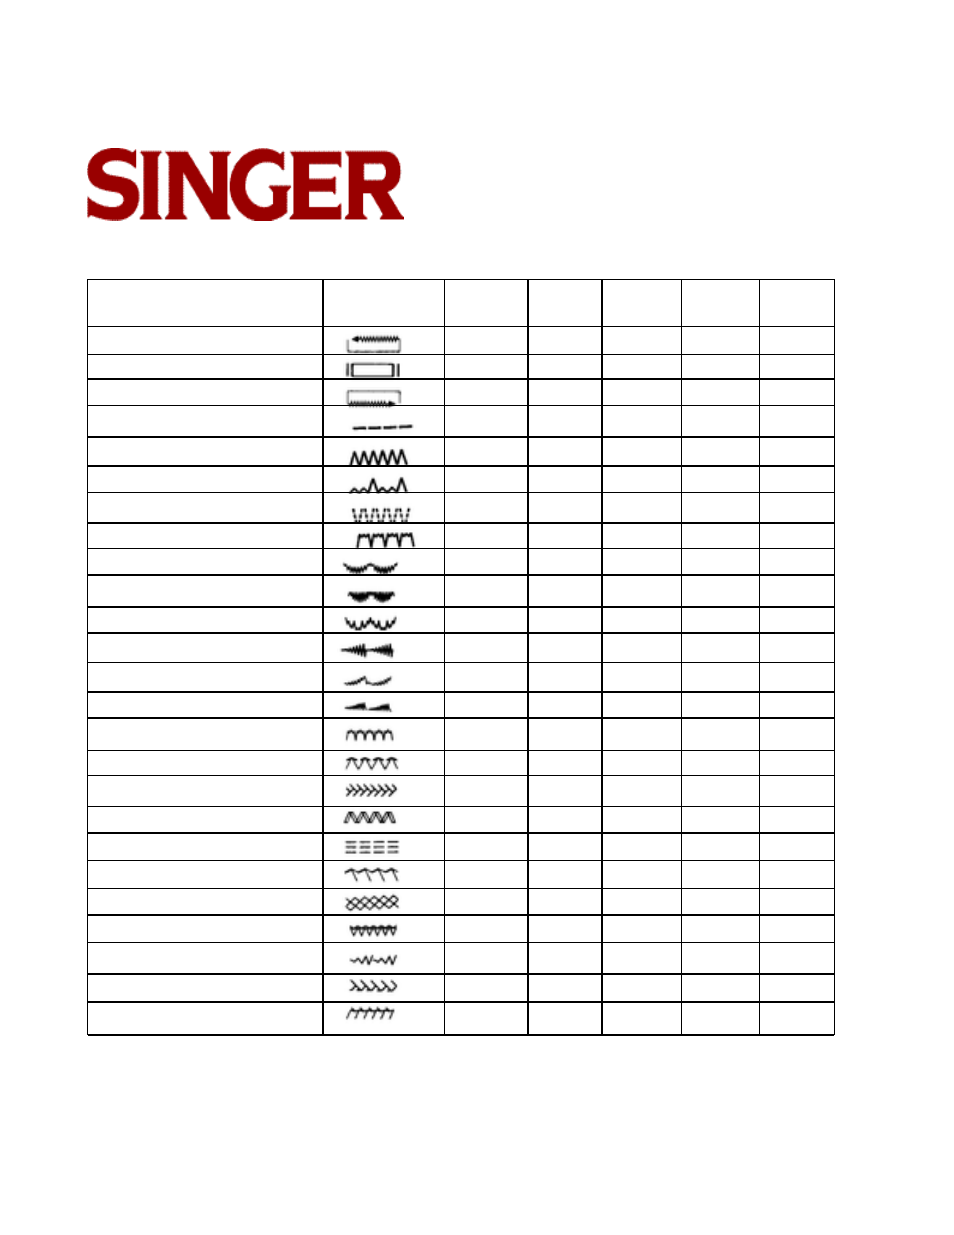 SINGER 18434 User Manual | Page 23 / 44 | Also for: 9027, 9026, 9022